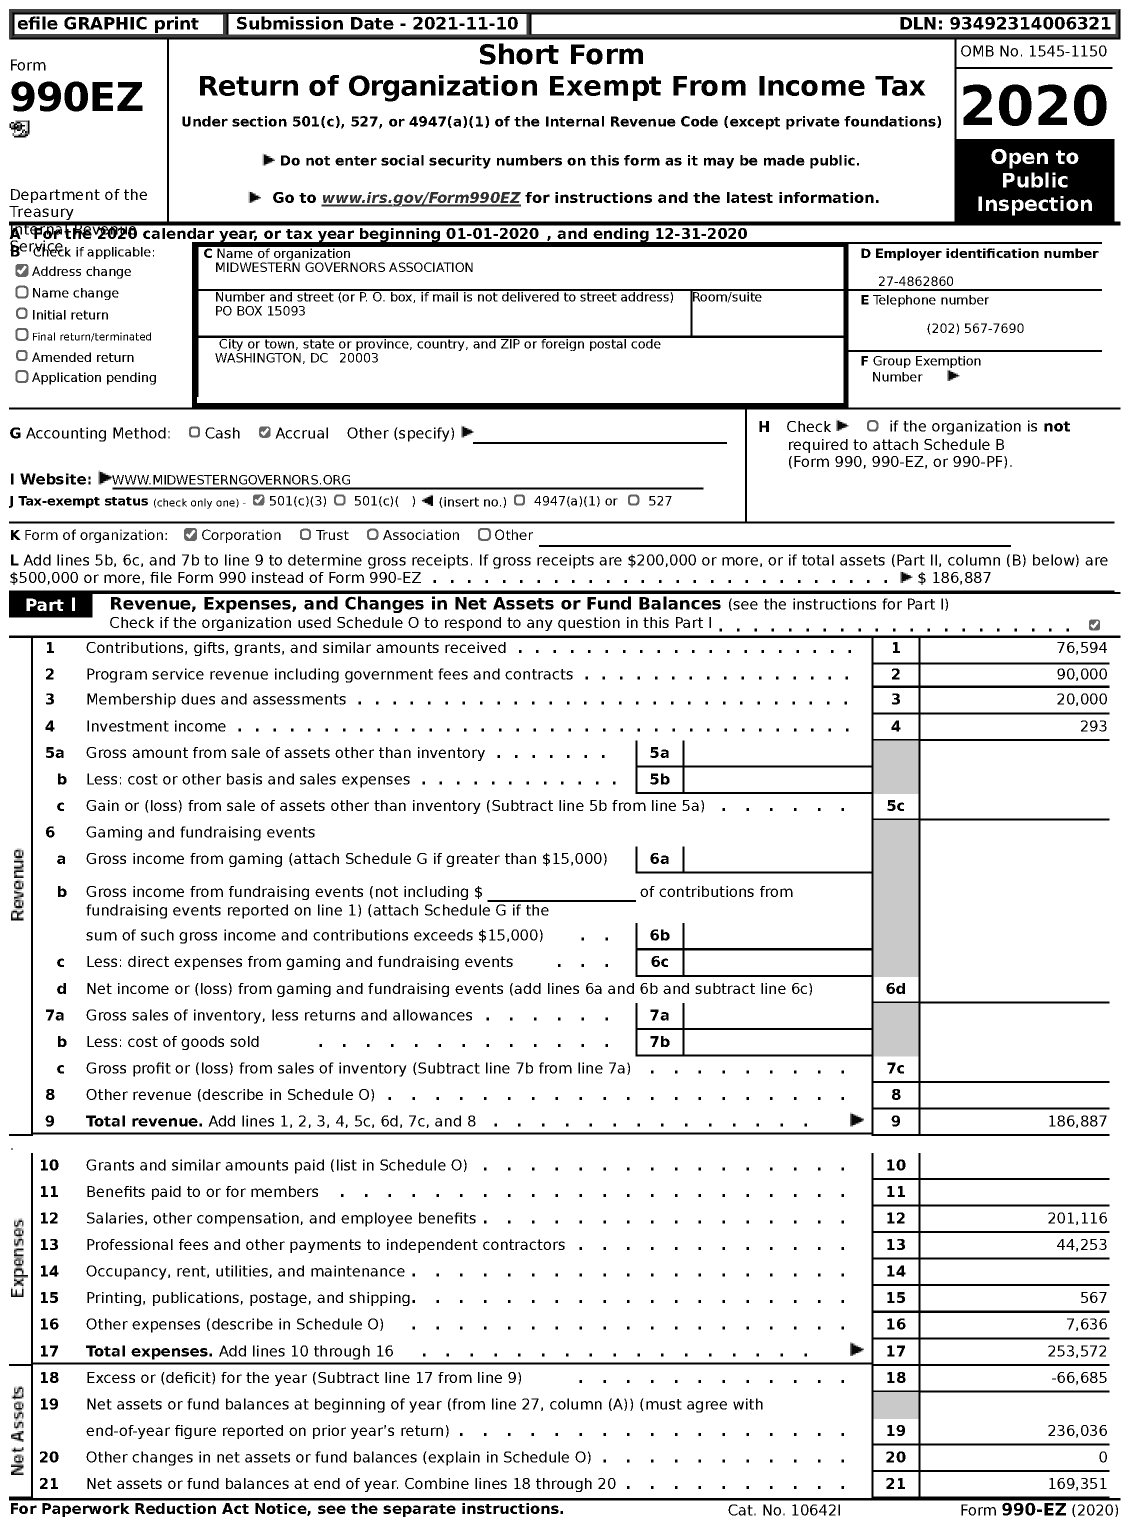 Image of first page of 2020 Form 990EZ for Midwestern Governors Association